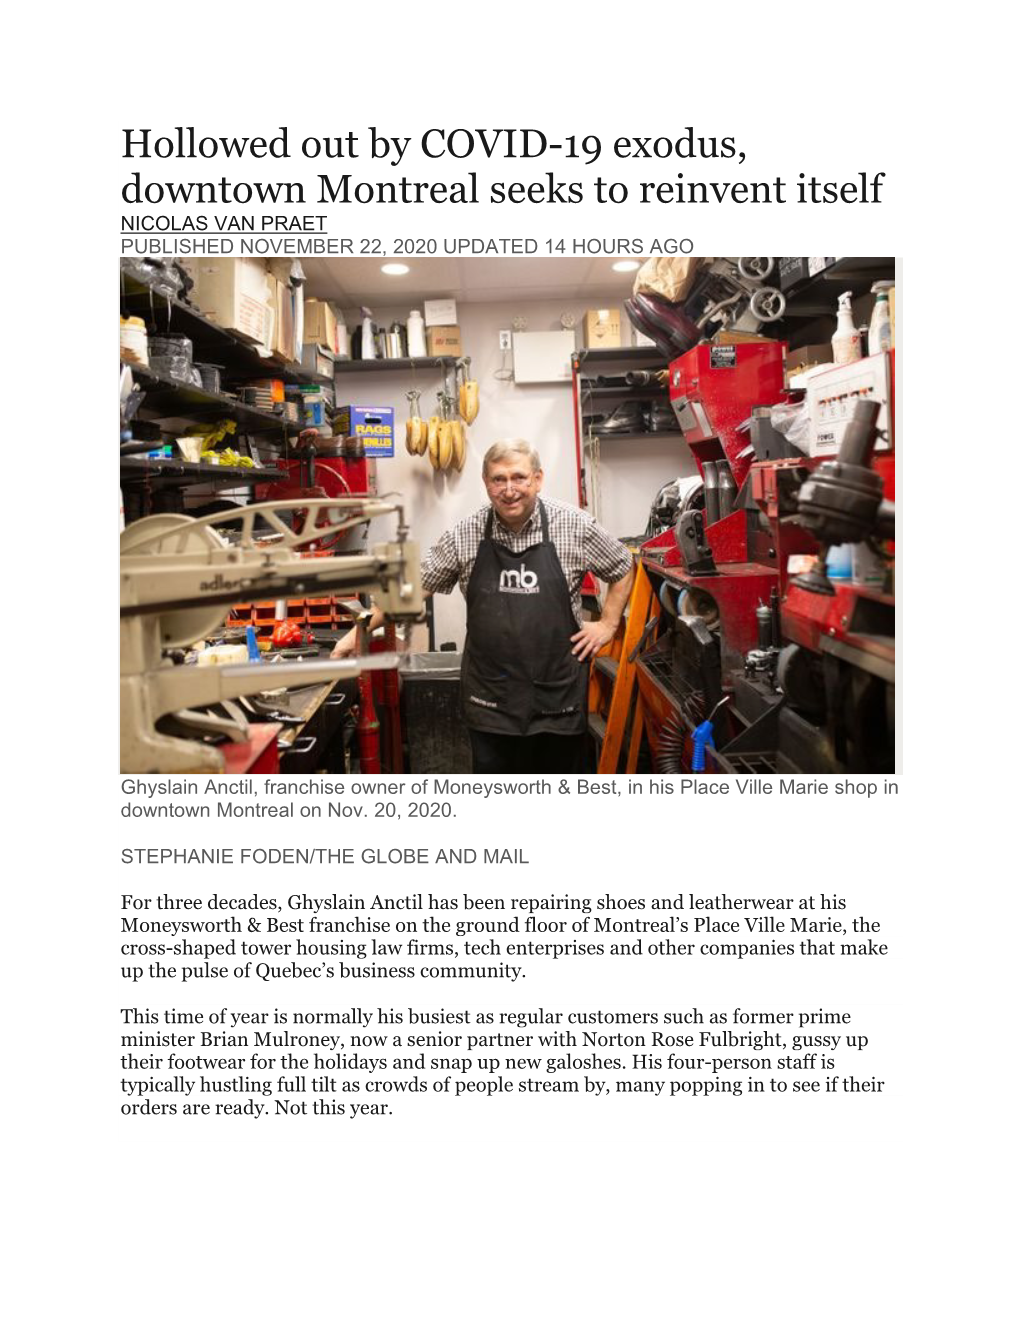 Hollowed out by COVID-19 Exodus, Downtown Montreal Seeks to Reinvent Itself NICOLAS VAN PRAET PUBLISHED NOVEMBER 22, 2020 UPDATED 14 HOURS AGO